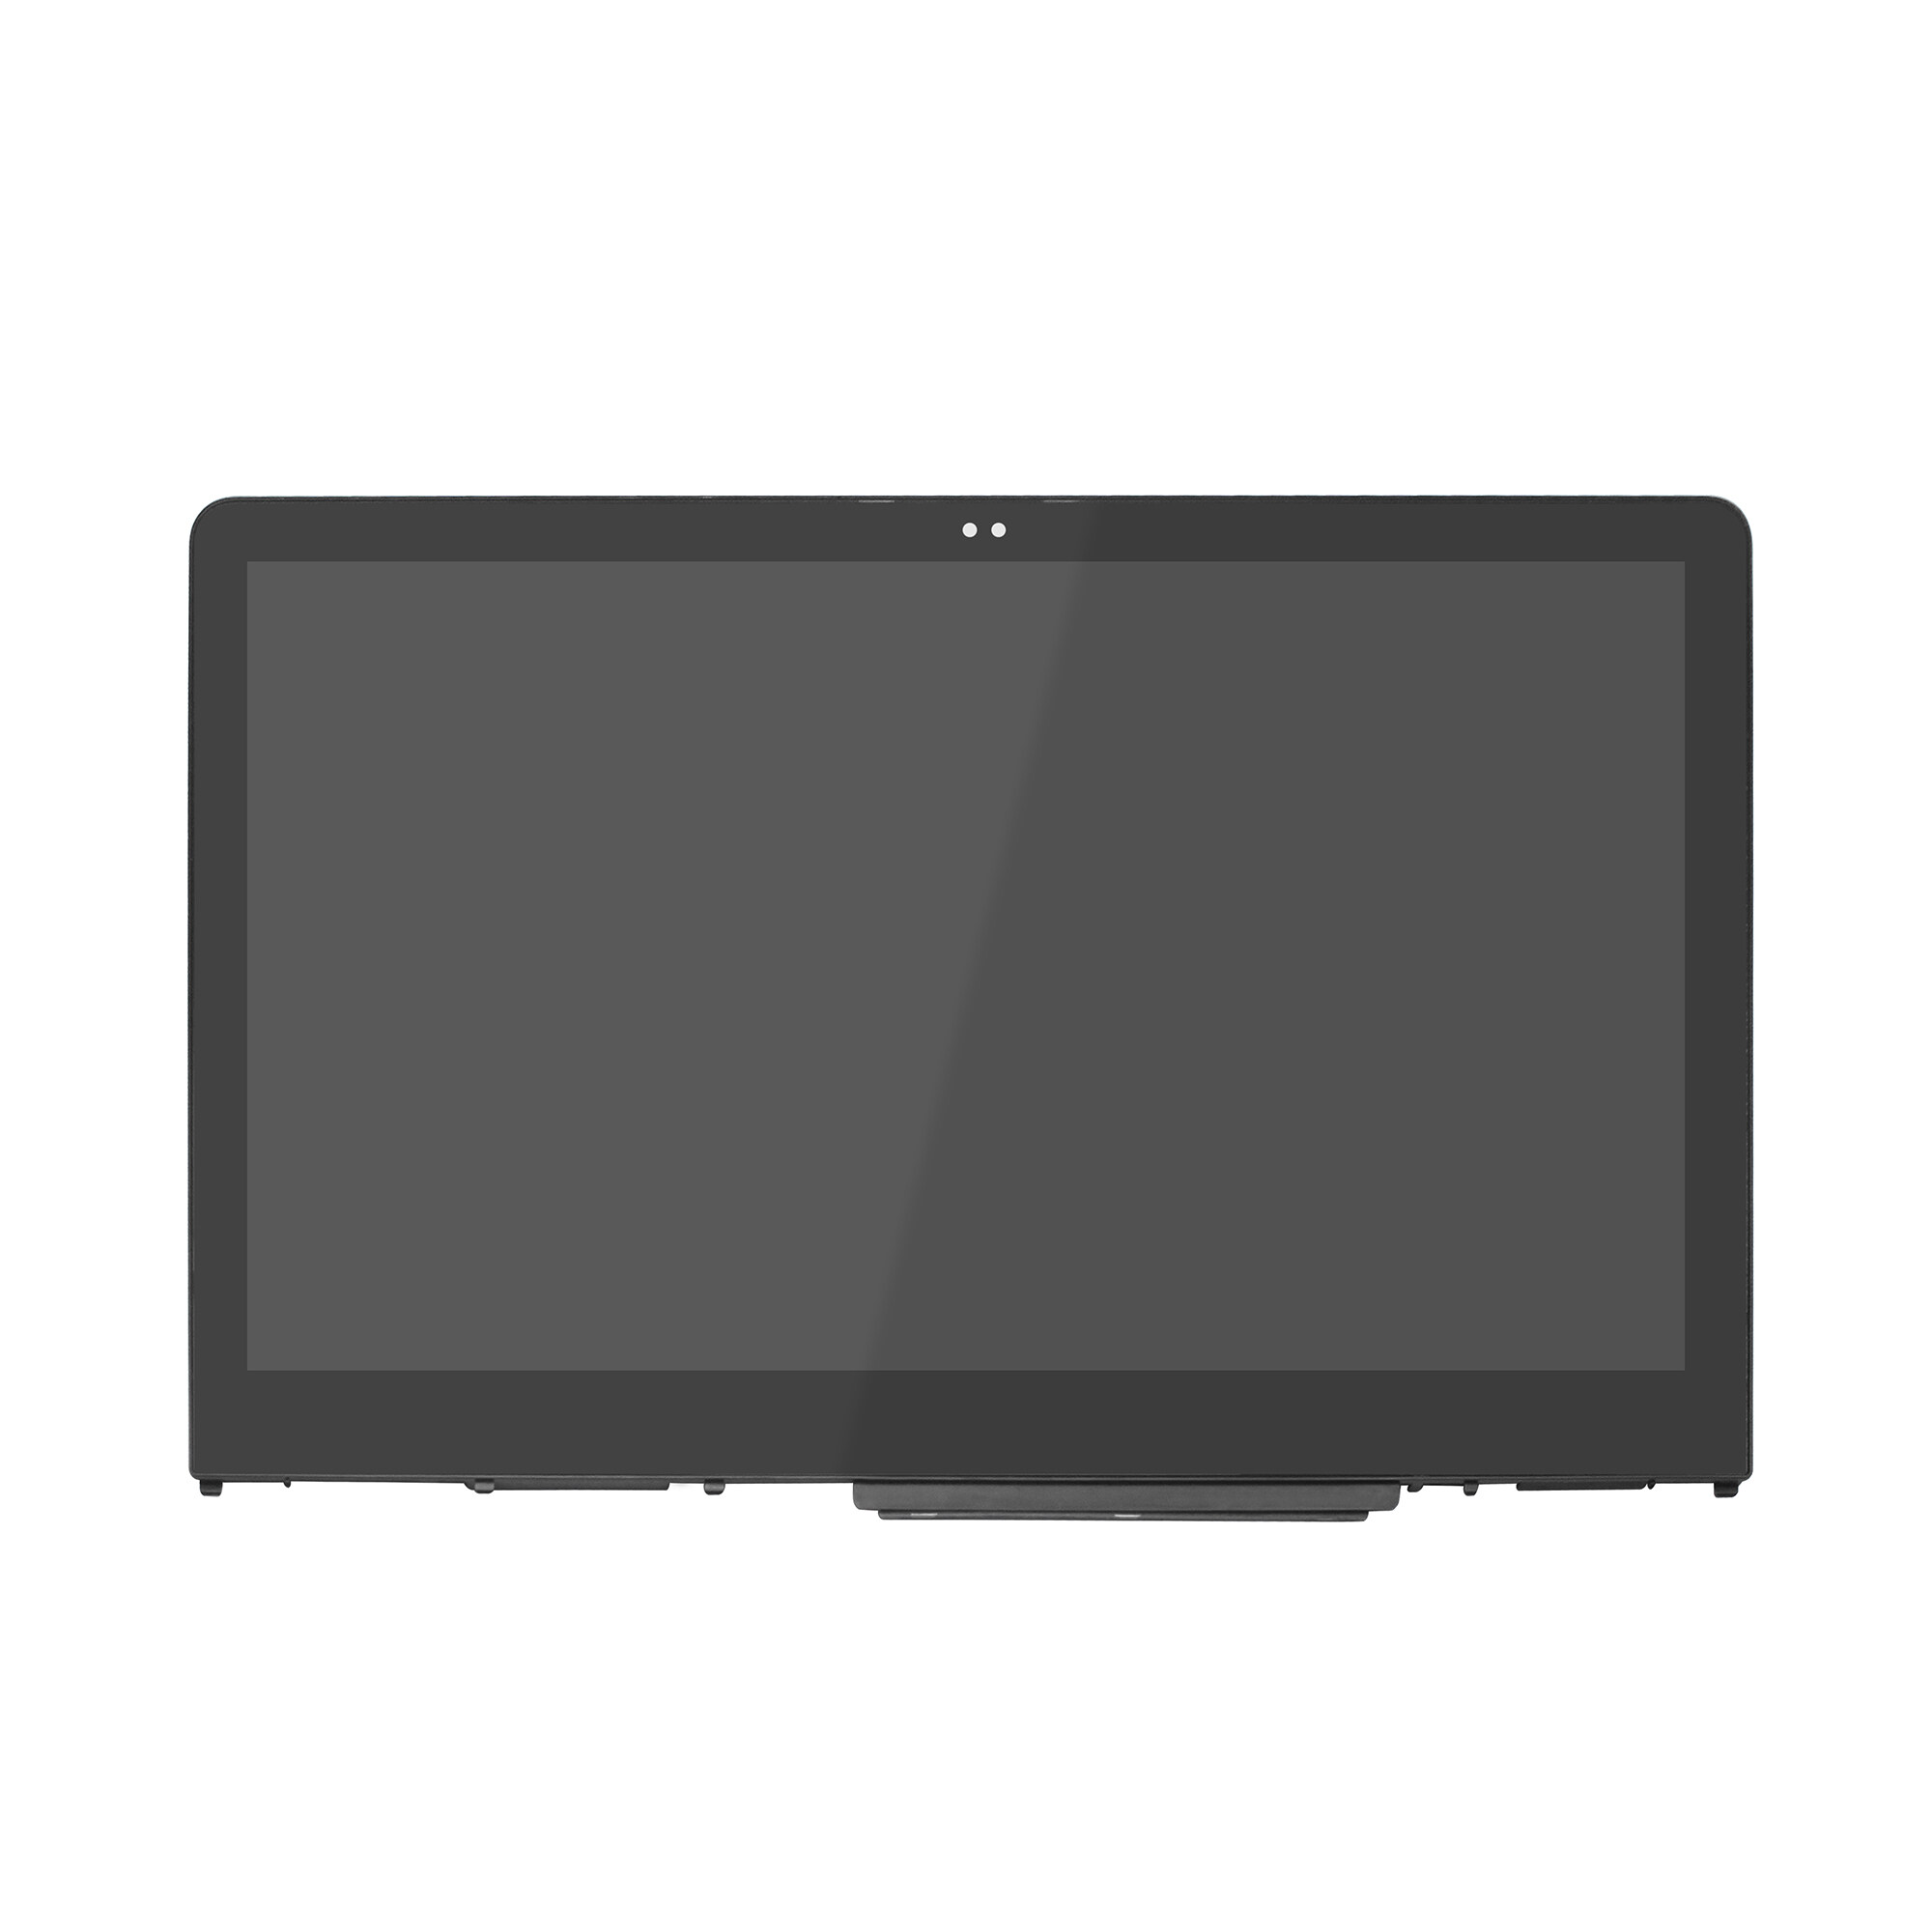 Kreplacement 15.6\" LED LCD Touchscreen Display for HP Pavilion x360 15-BR000 15-br 925711-001 15-br052od 924531-001